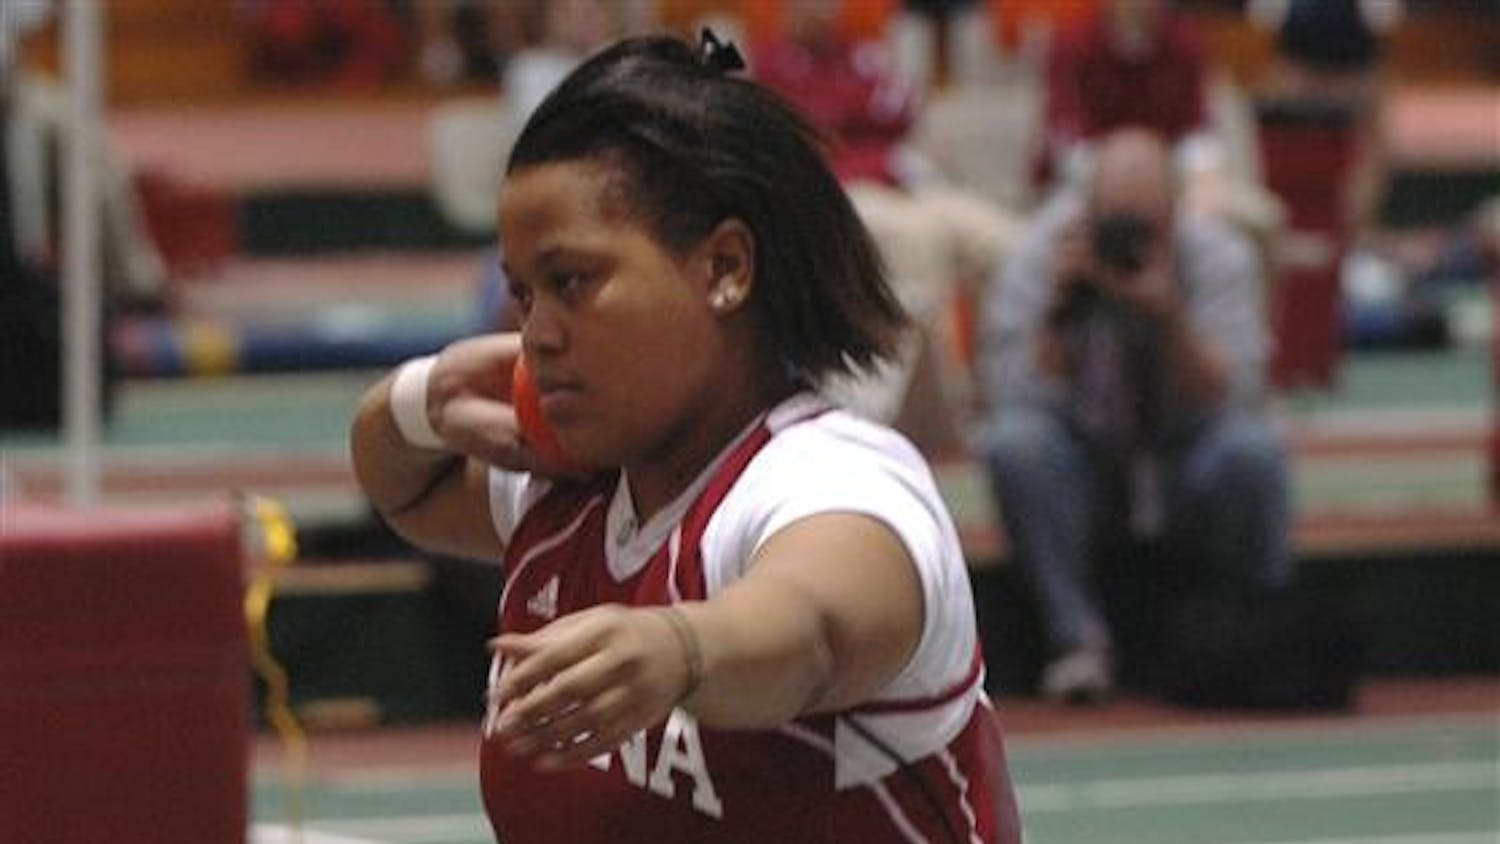 Senior Tiffany Howard prepares to throw a shotput on Saturday afternoon at the Harry Gladstein Fieldhouse. Howard scored ten points for her first place finish at the Big Ten Championships this weekend.